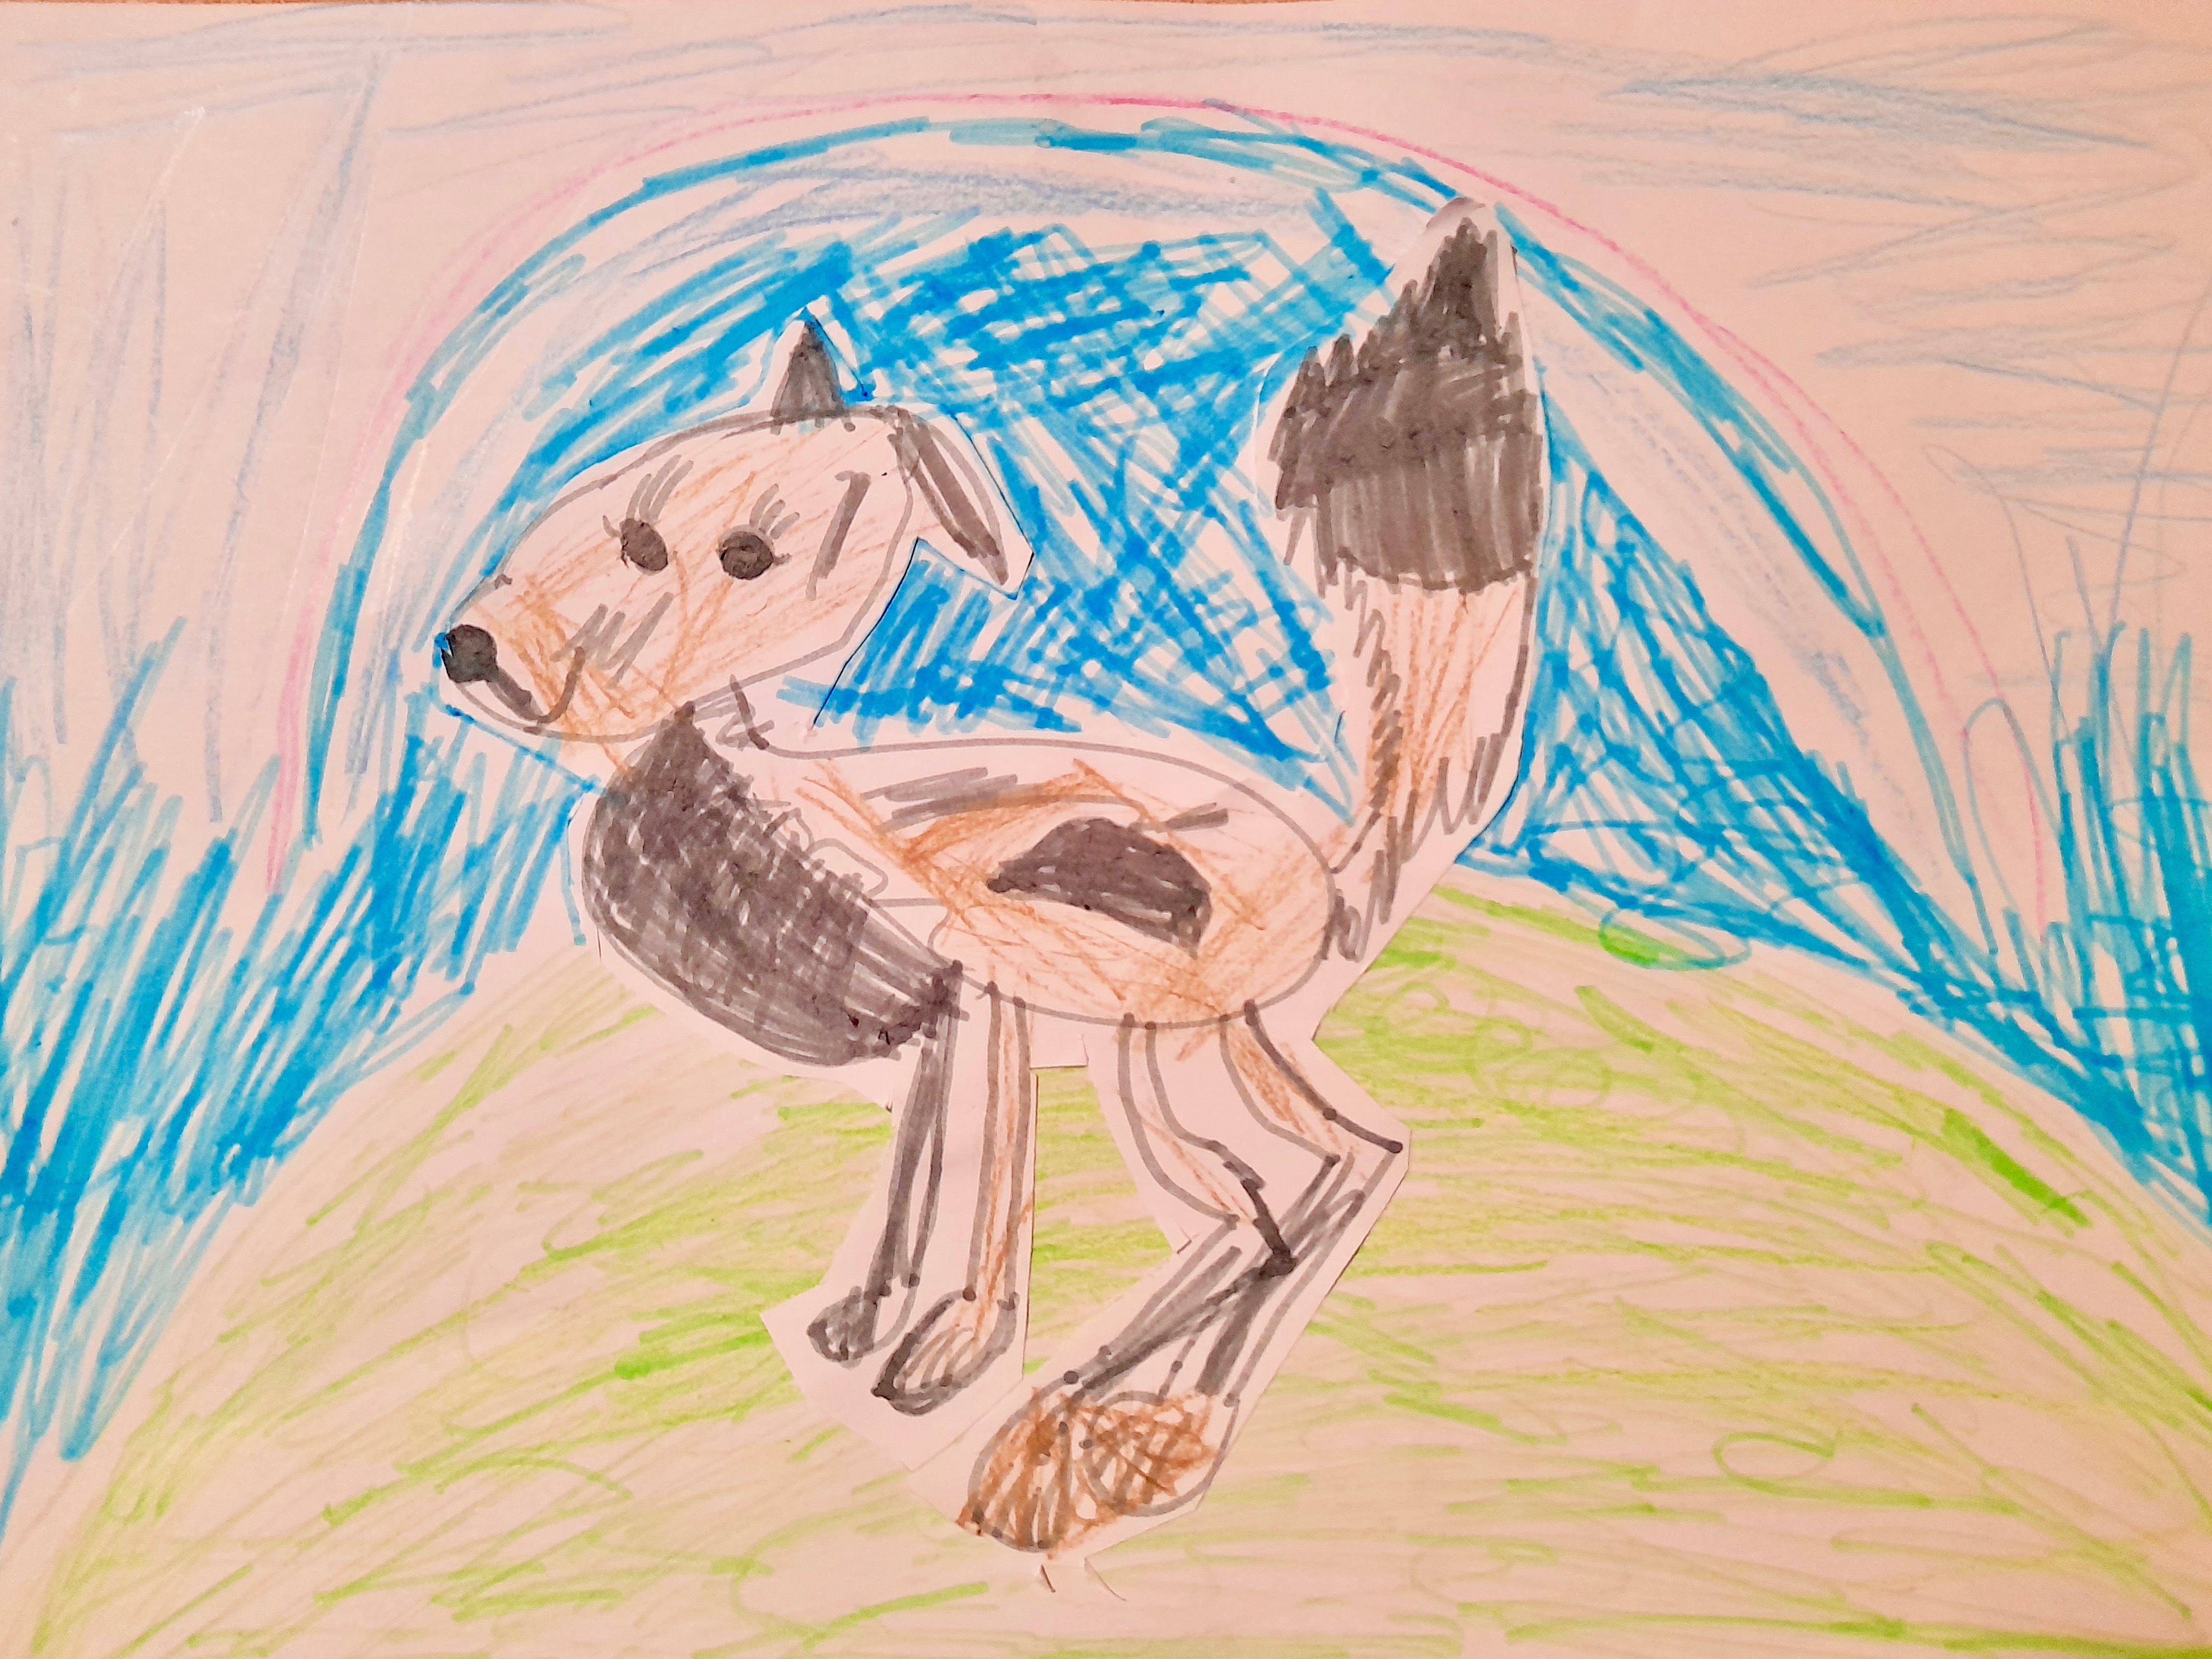 'My Dog Clover' by Holly-James (6) from Offaly